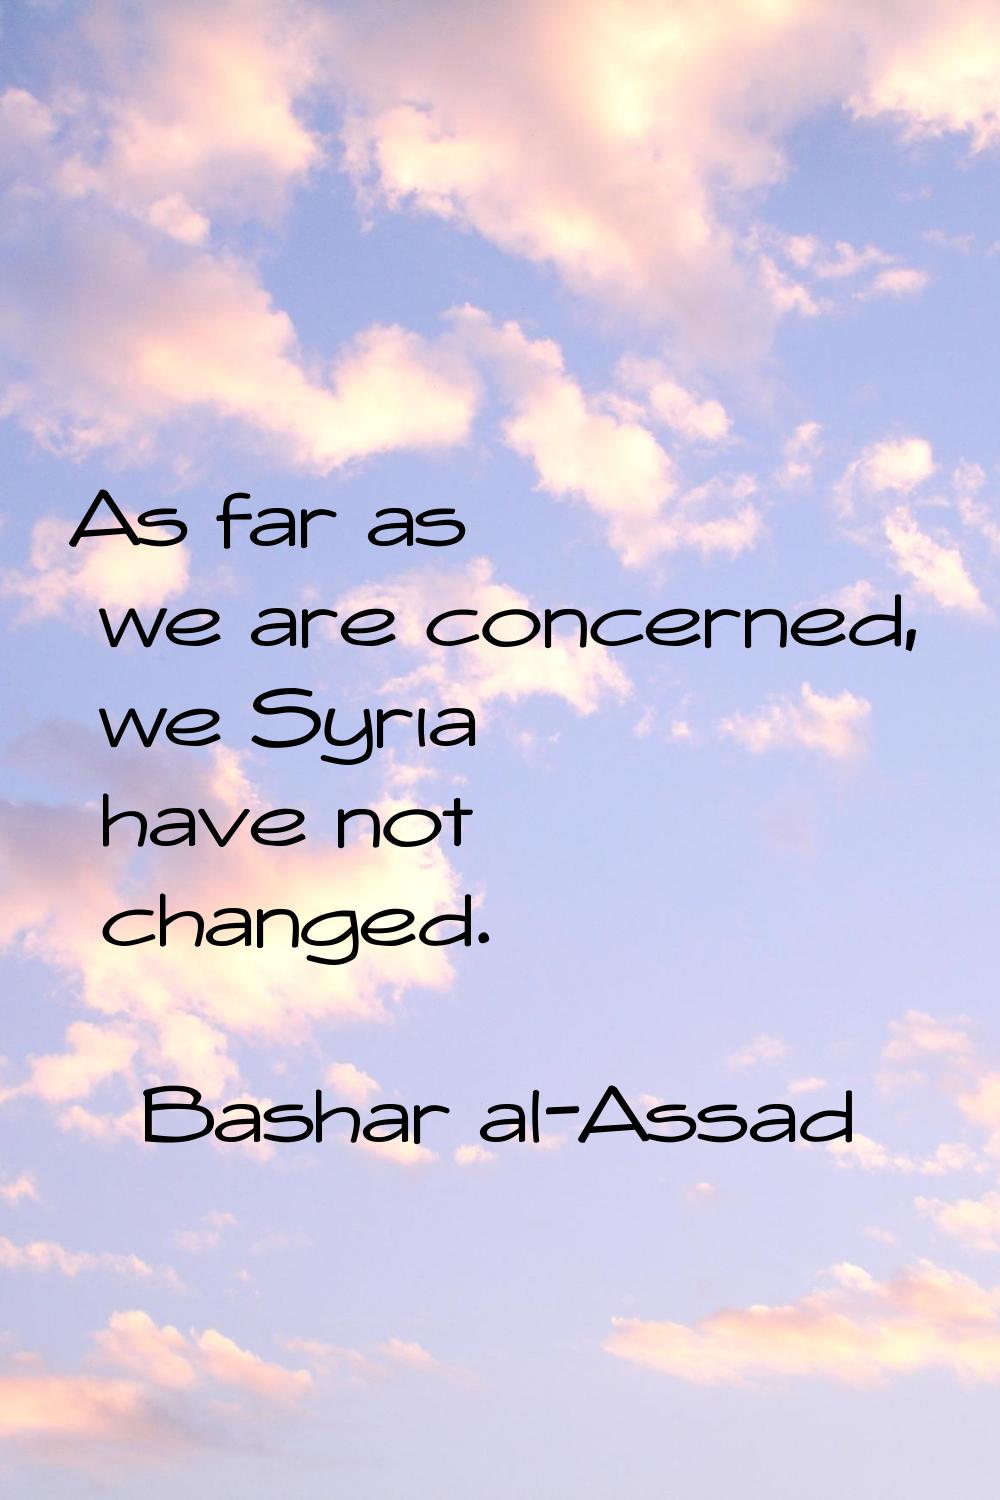 As far as we are concerned, we Syria have not changed.